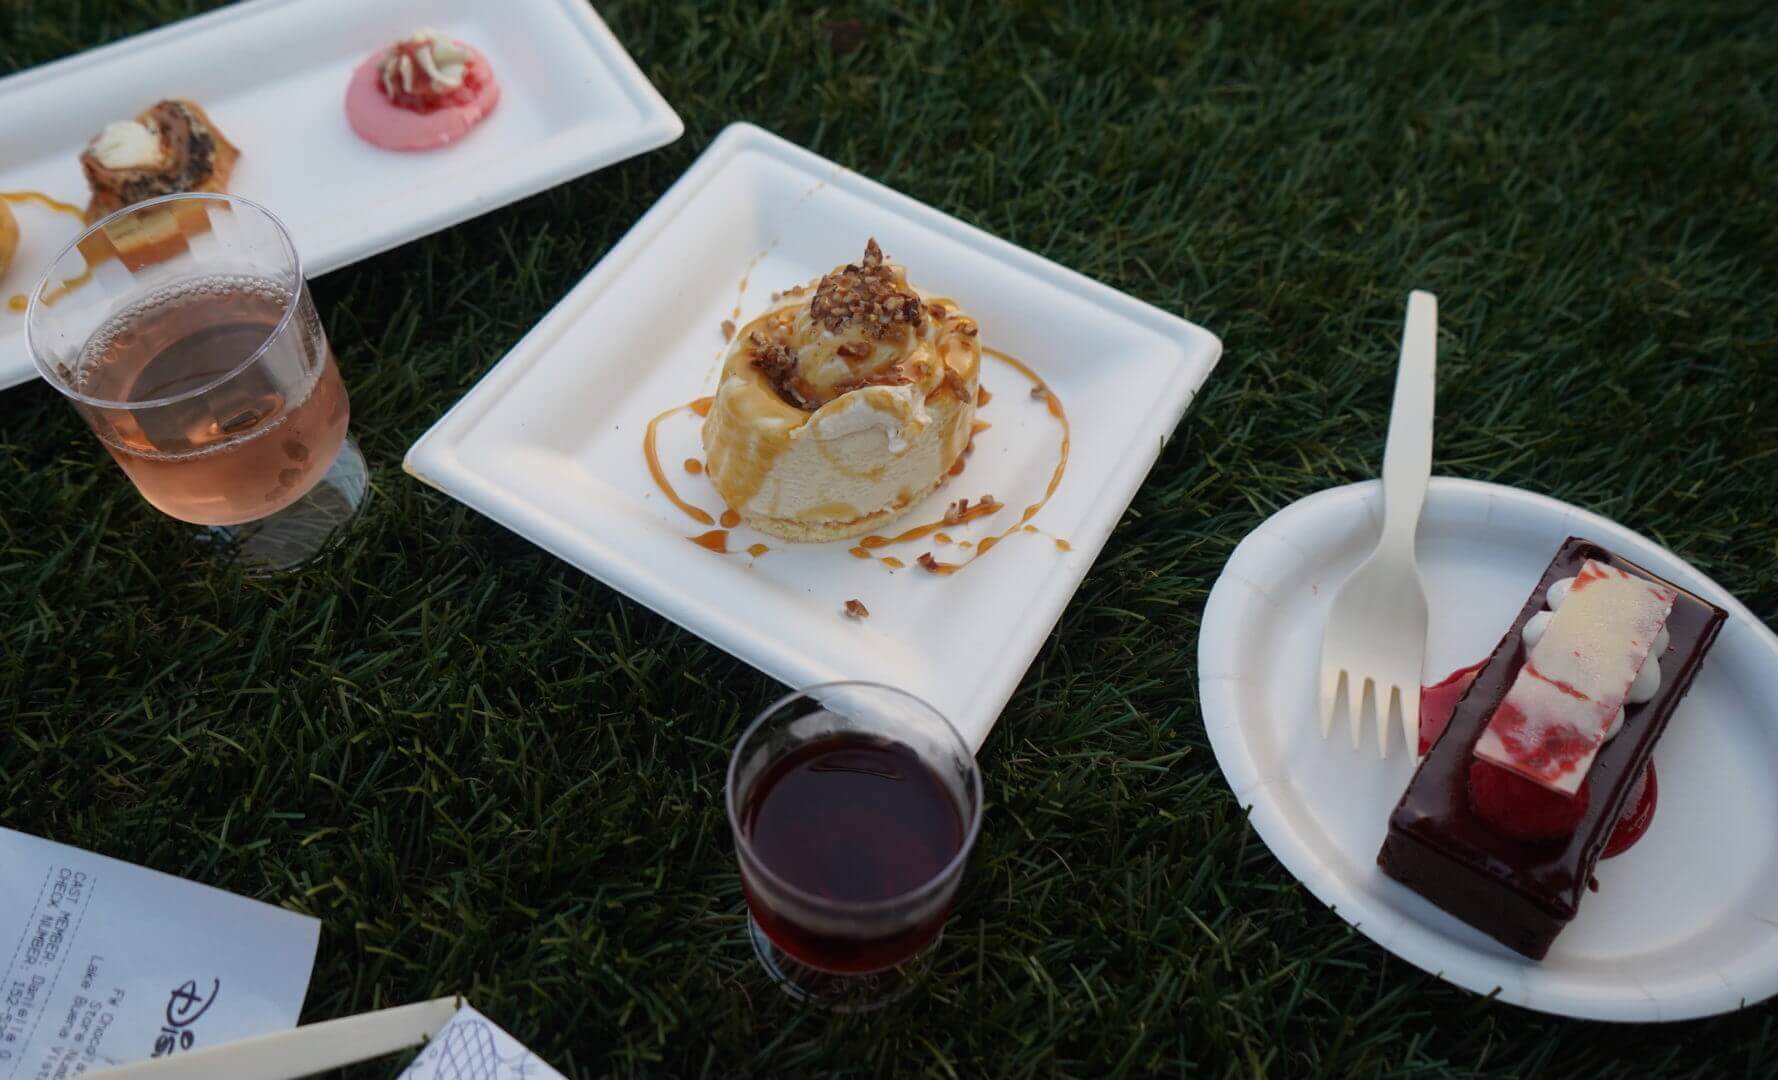 Chocolate Tart, Bourbon Maple Cheesecake, and Cheese Trio from Epcot's Food & Wine Festival 2018